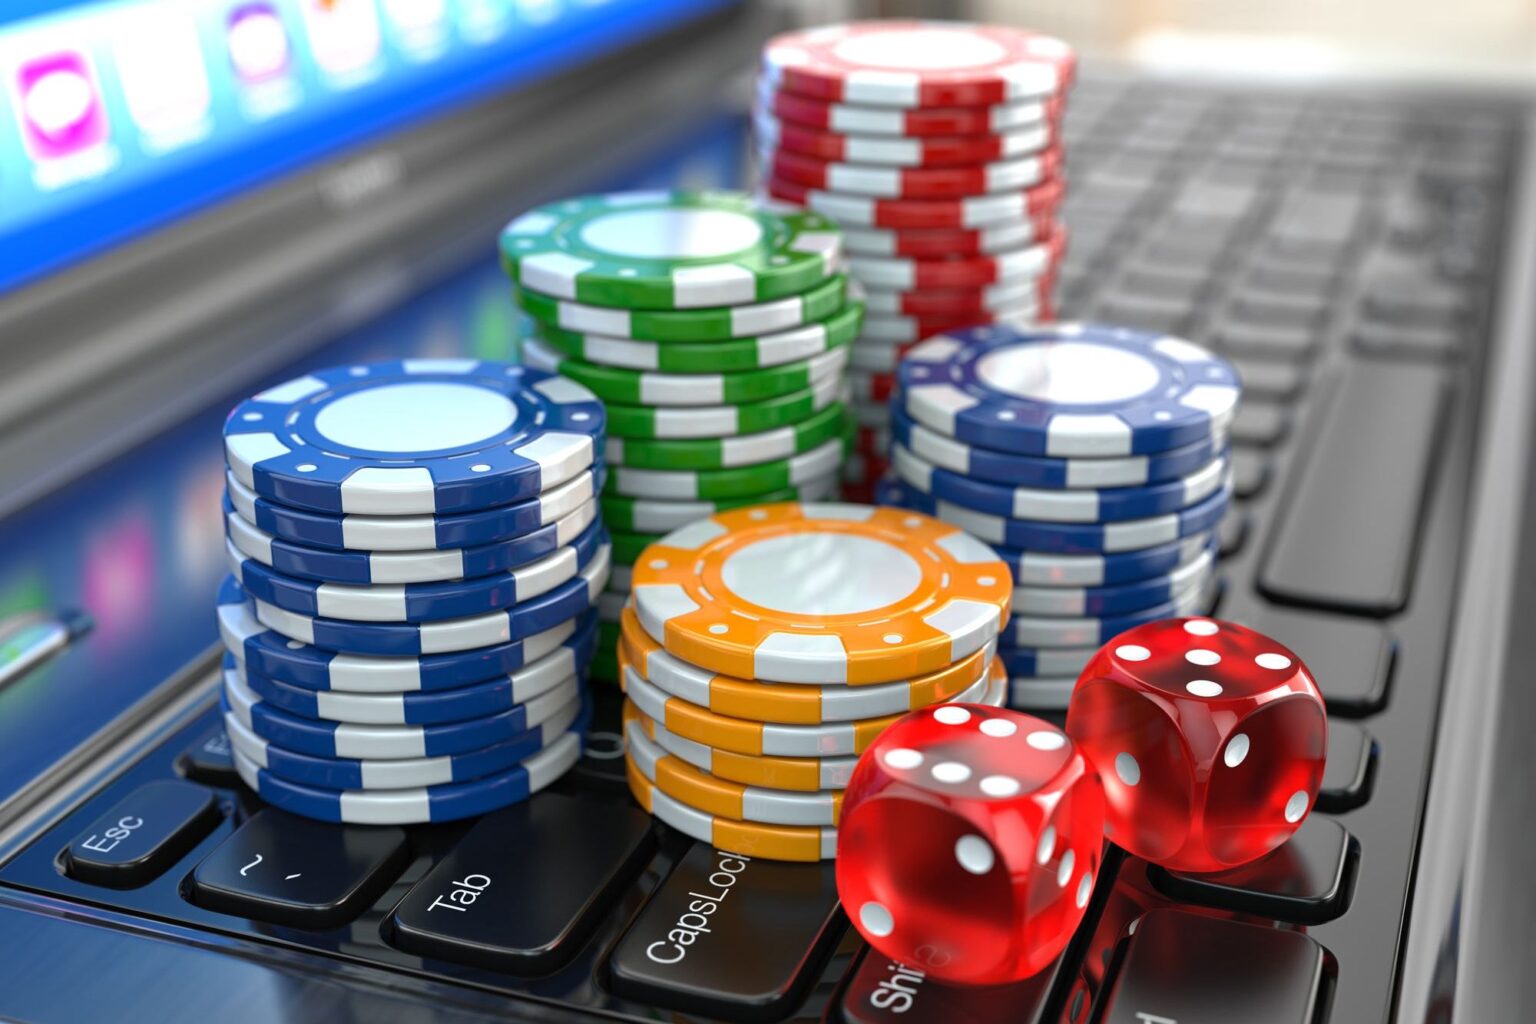 There are tons of online gambling options. Here's a breakdown of the best online casino games to check out.